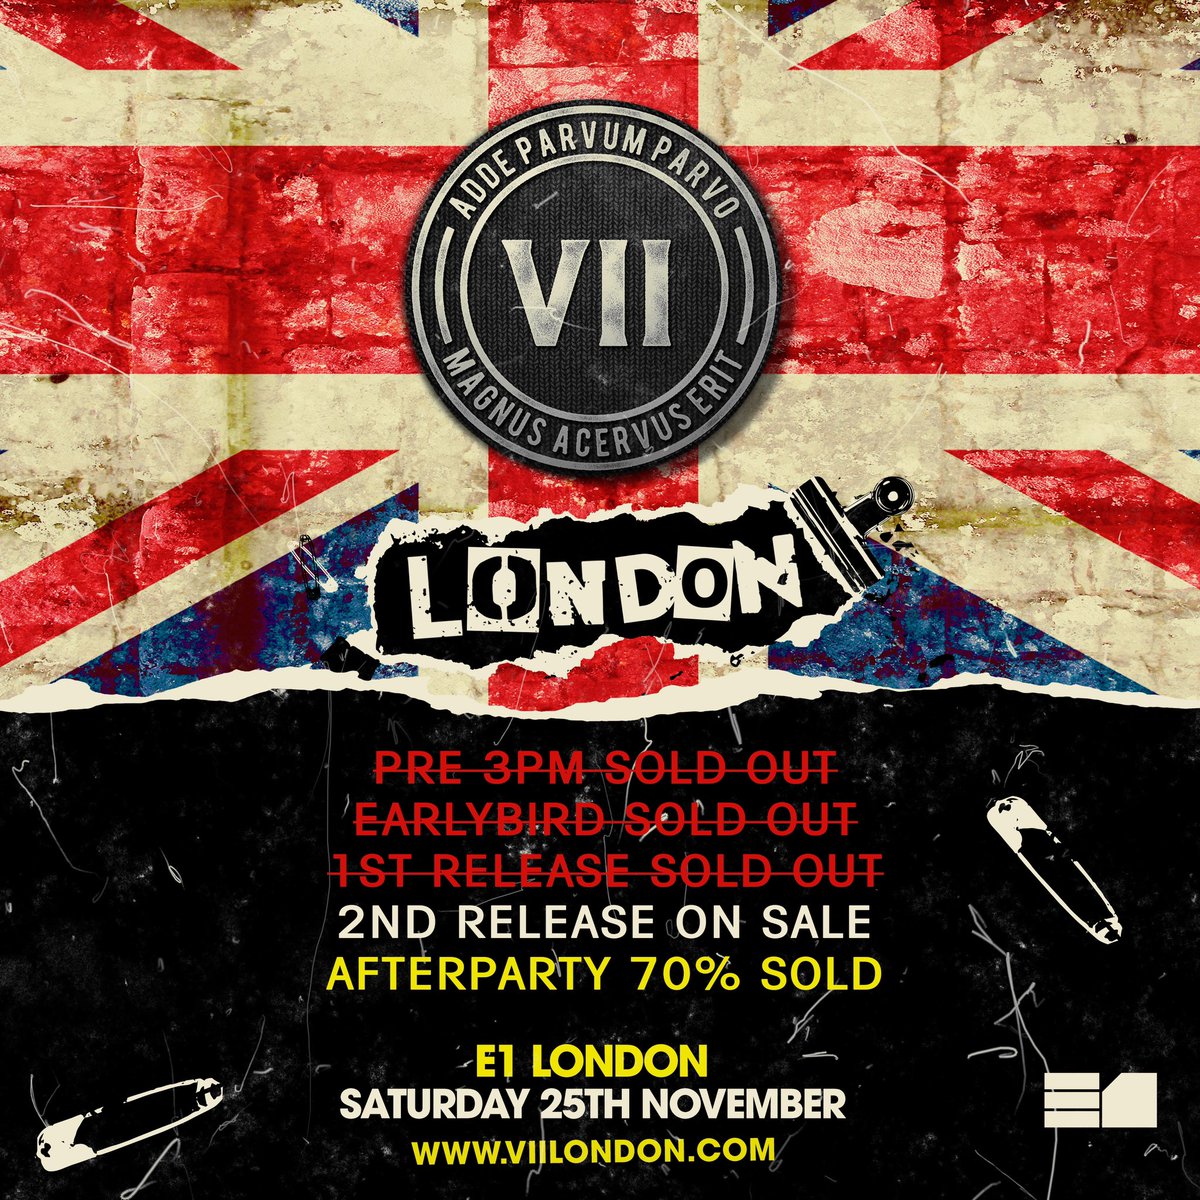 First release now also sold out. 🤘🏻viilondon.com